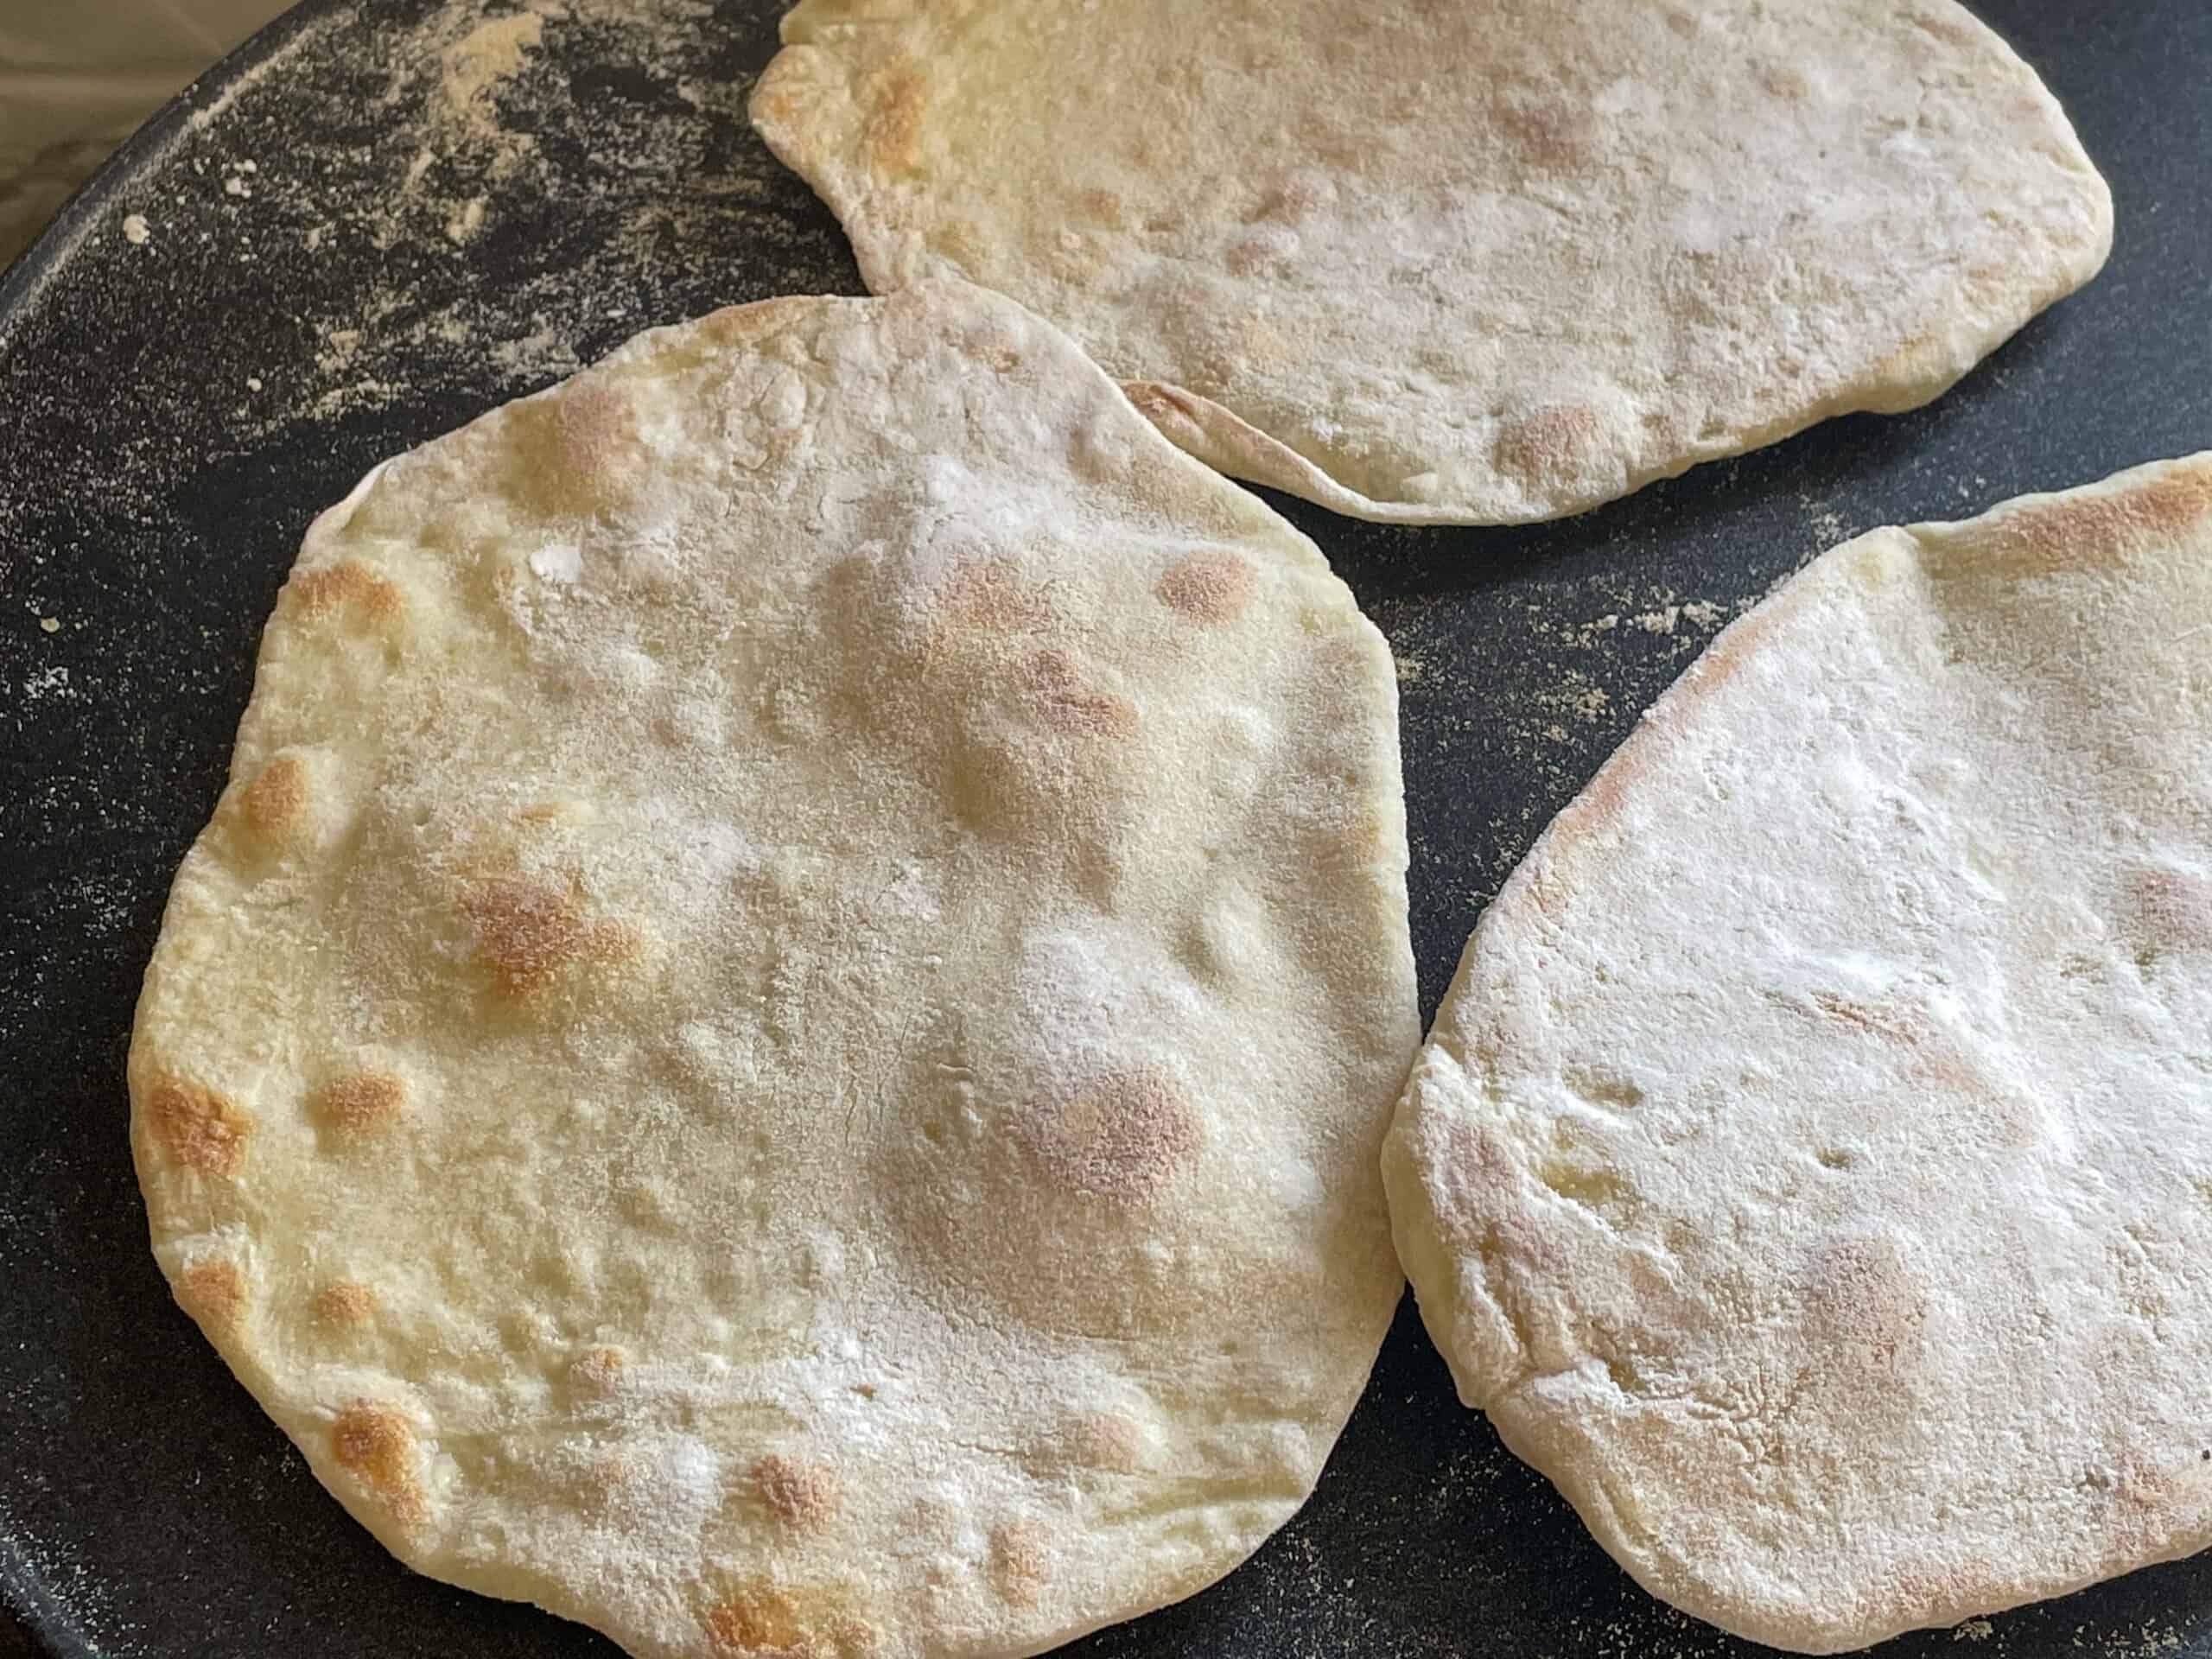 Flatbreads cooking on a hotplate with large bubbles forming on the cooking flatbreads.